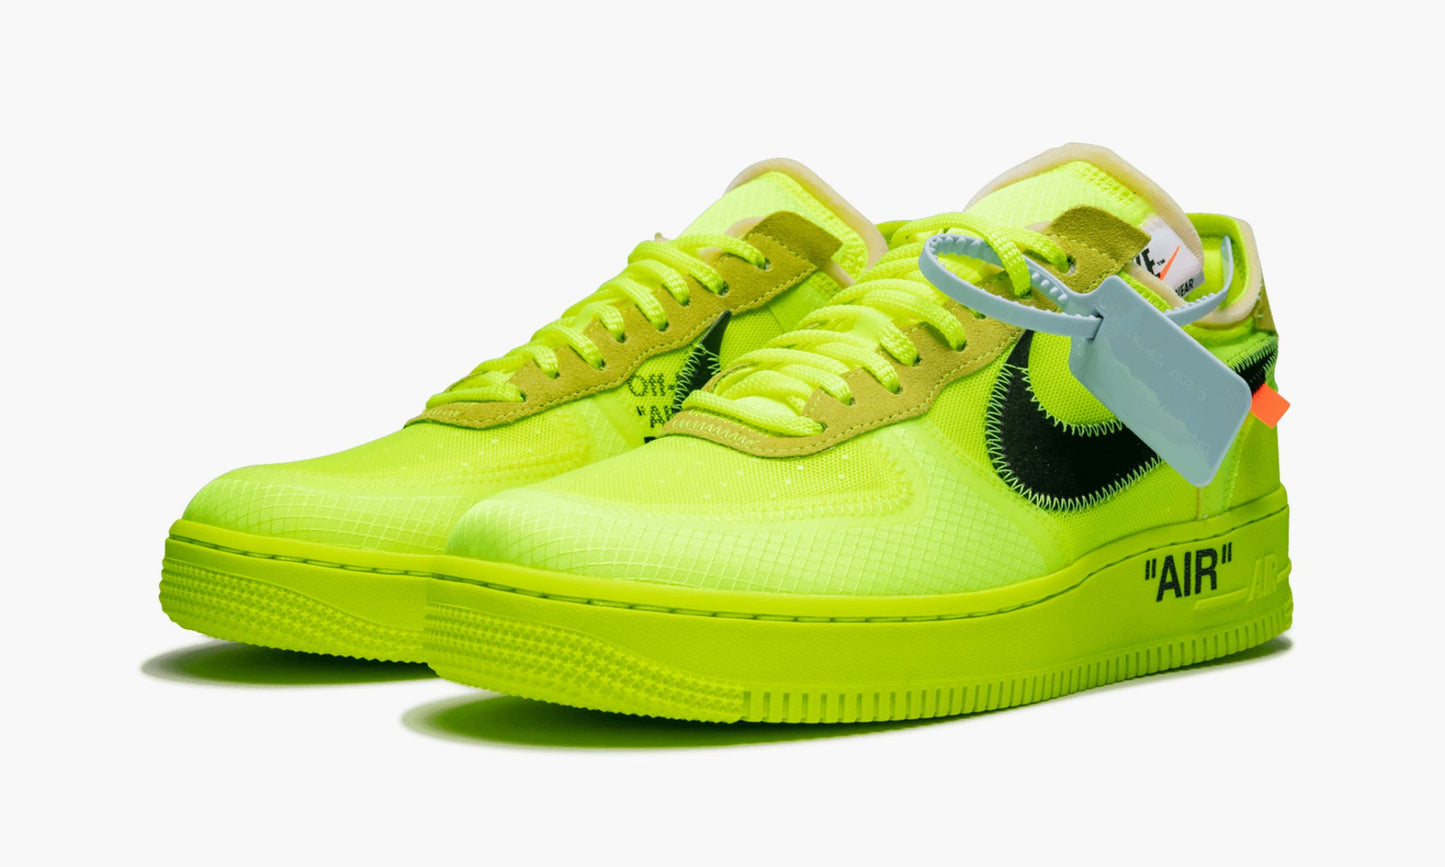 The 10: Nike Air Force 1 Low "Off-White Volt"